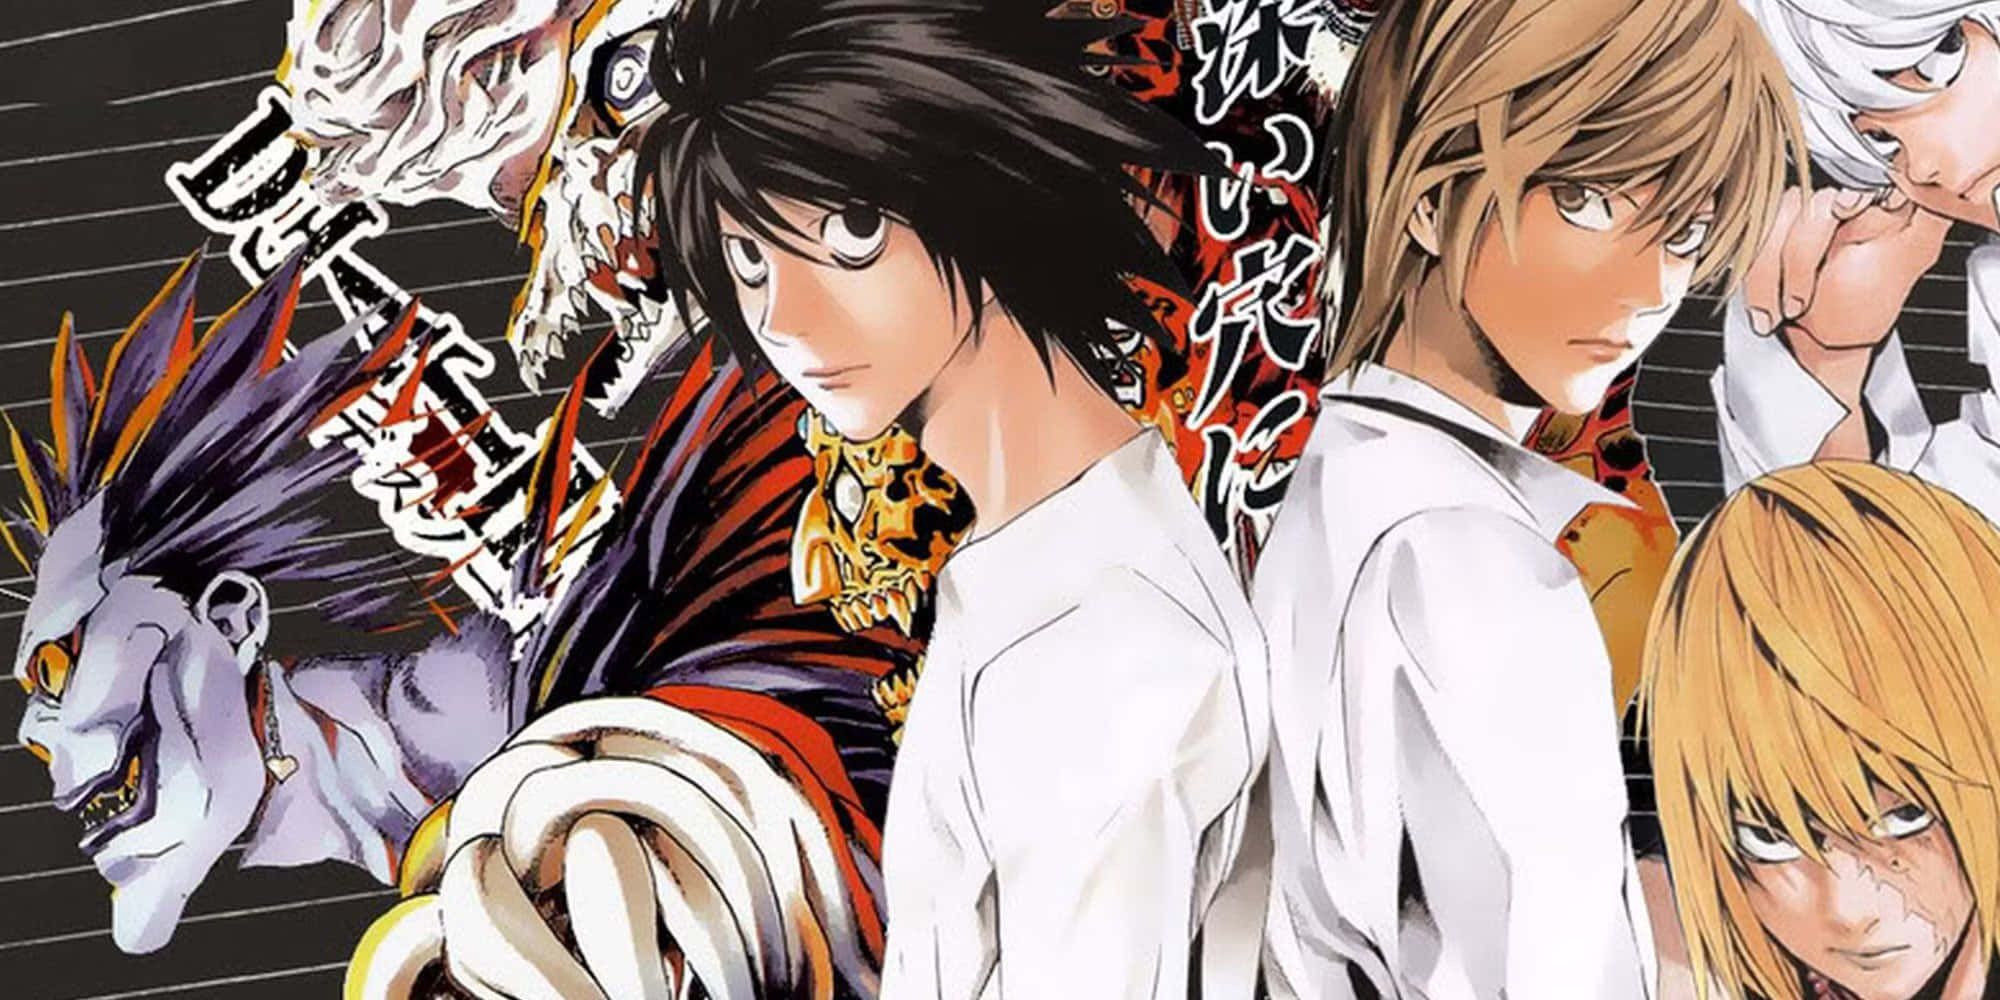 The battle of good and evil – Light Yagami clashes with L in Death Note